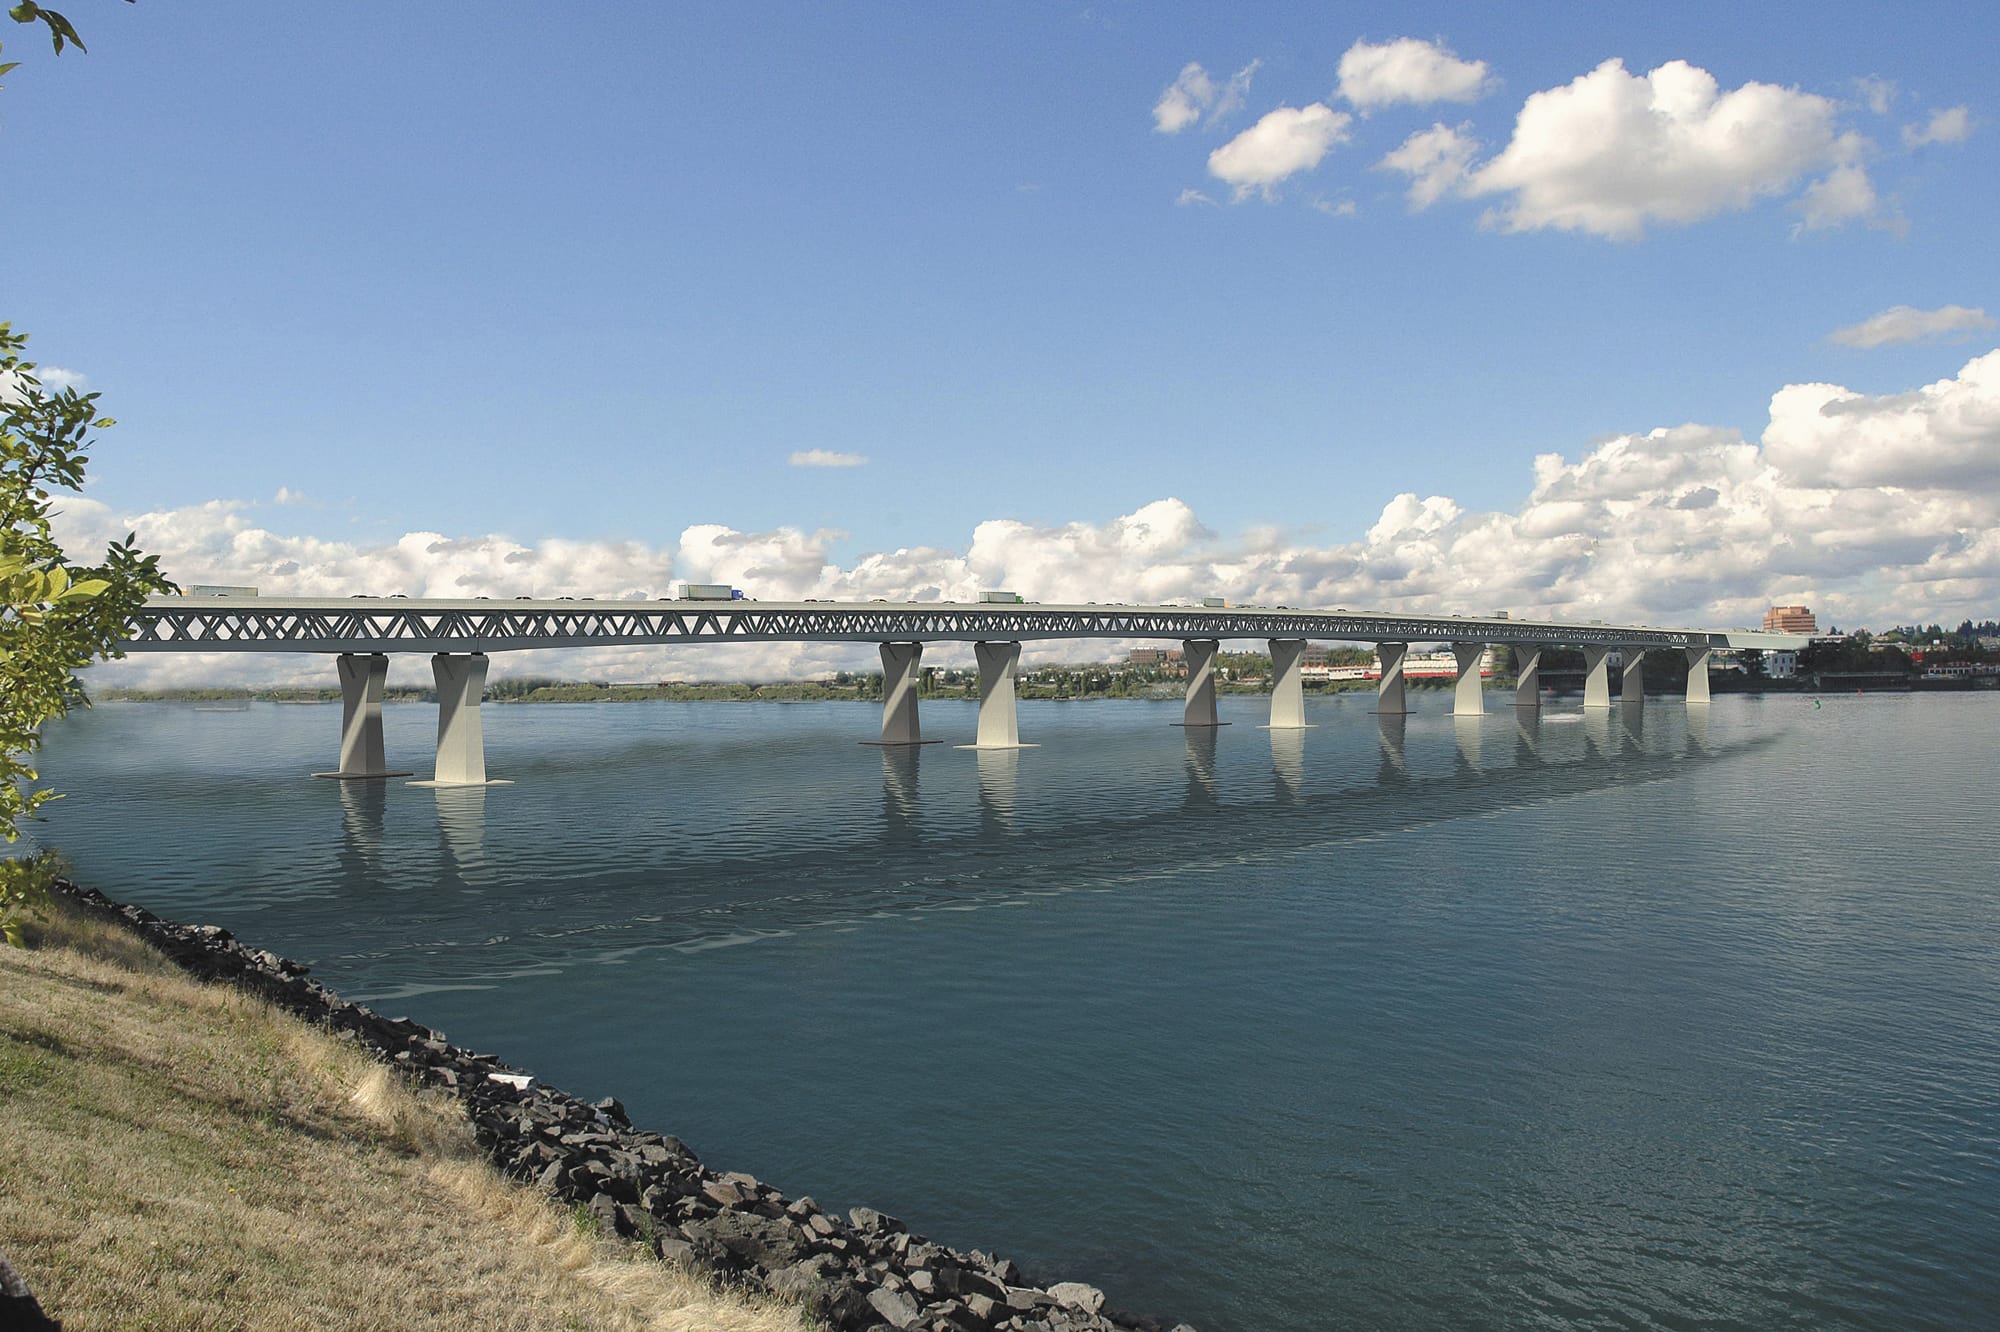 A plan to replace the Interstate Bridge died, for the moment, when the Washington Legislature didn't authorize any money for the project.